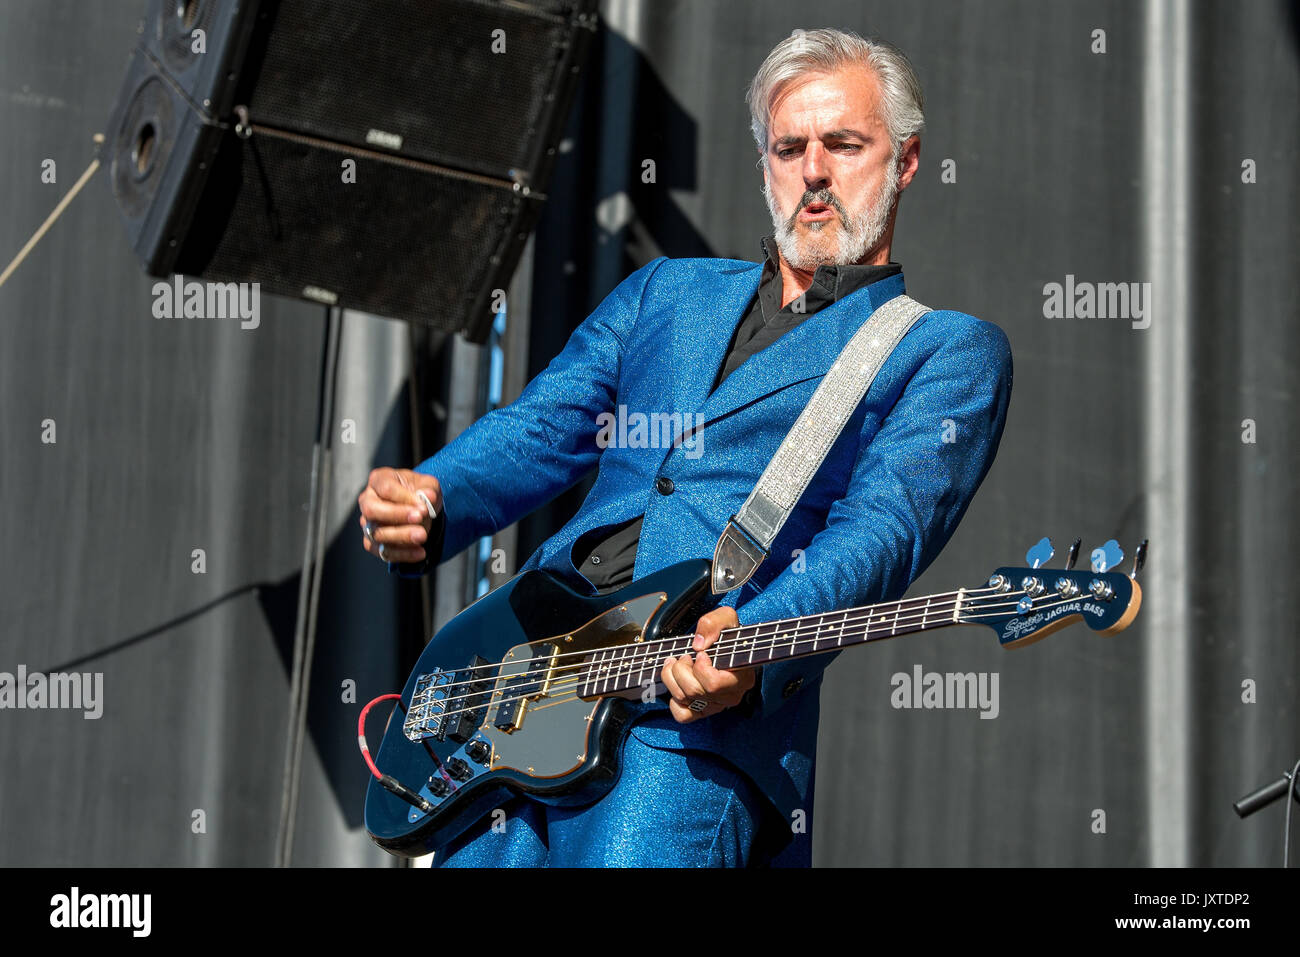 MADRID - JUN 23: Triggerfinger (rock music band) perform in concert at Download (heavy metal music festival) on June 23, 2017 in Madrid, Spain. Stock Photo